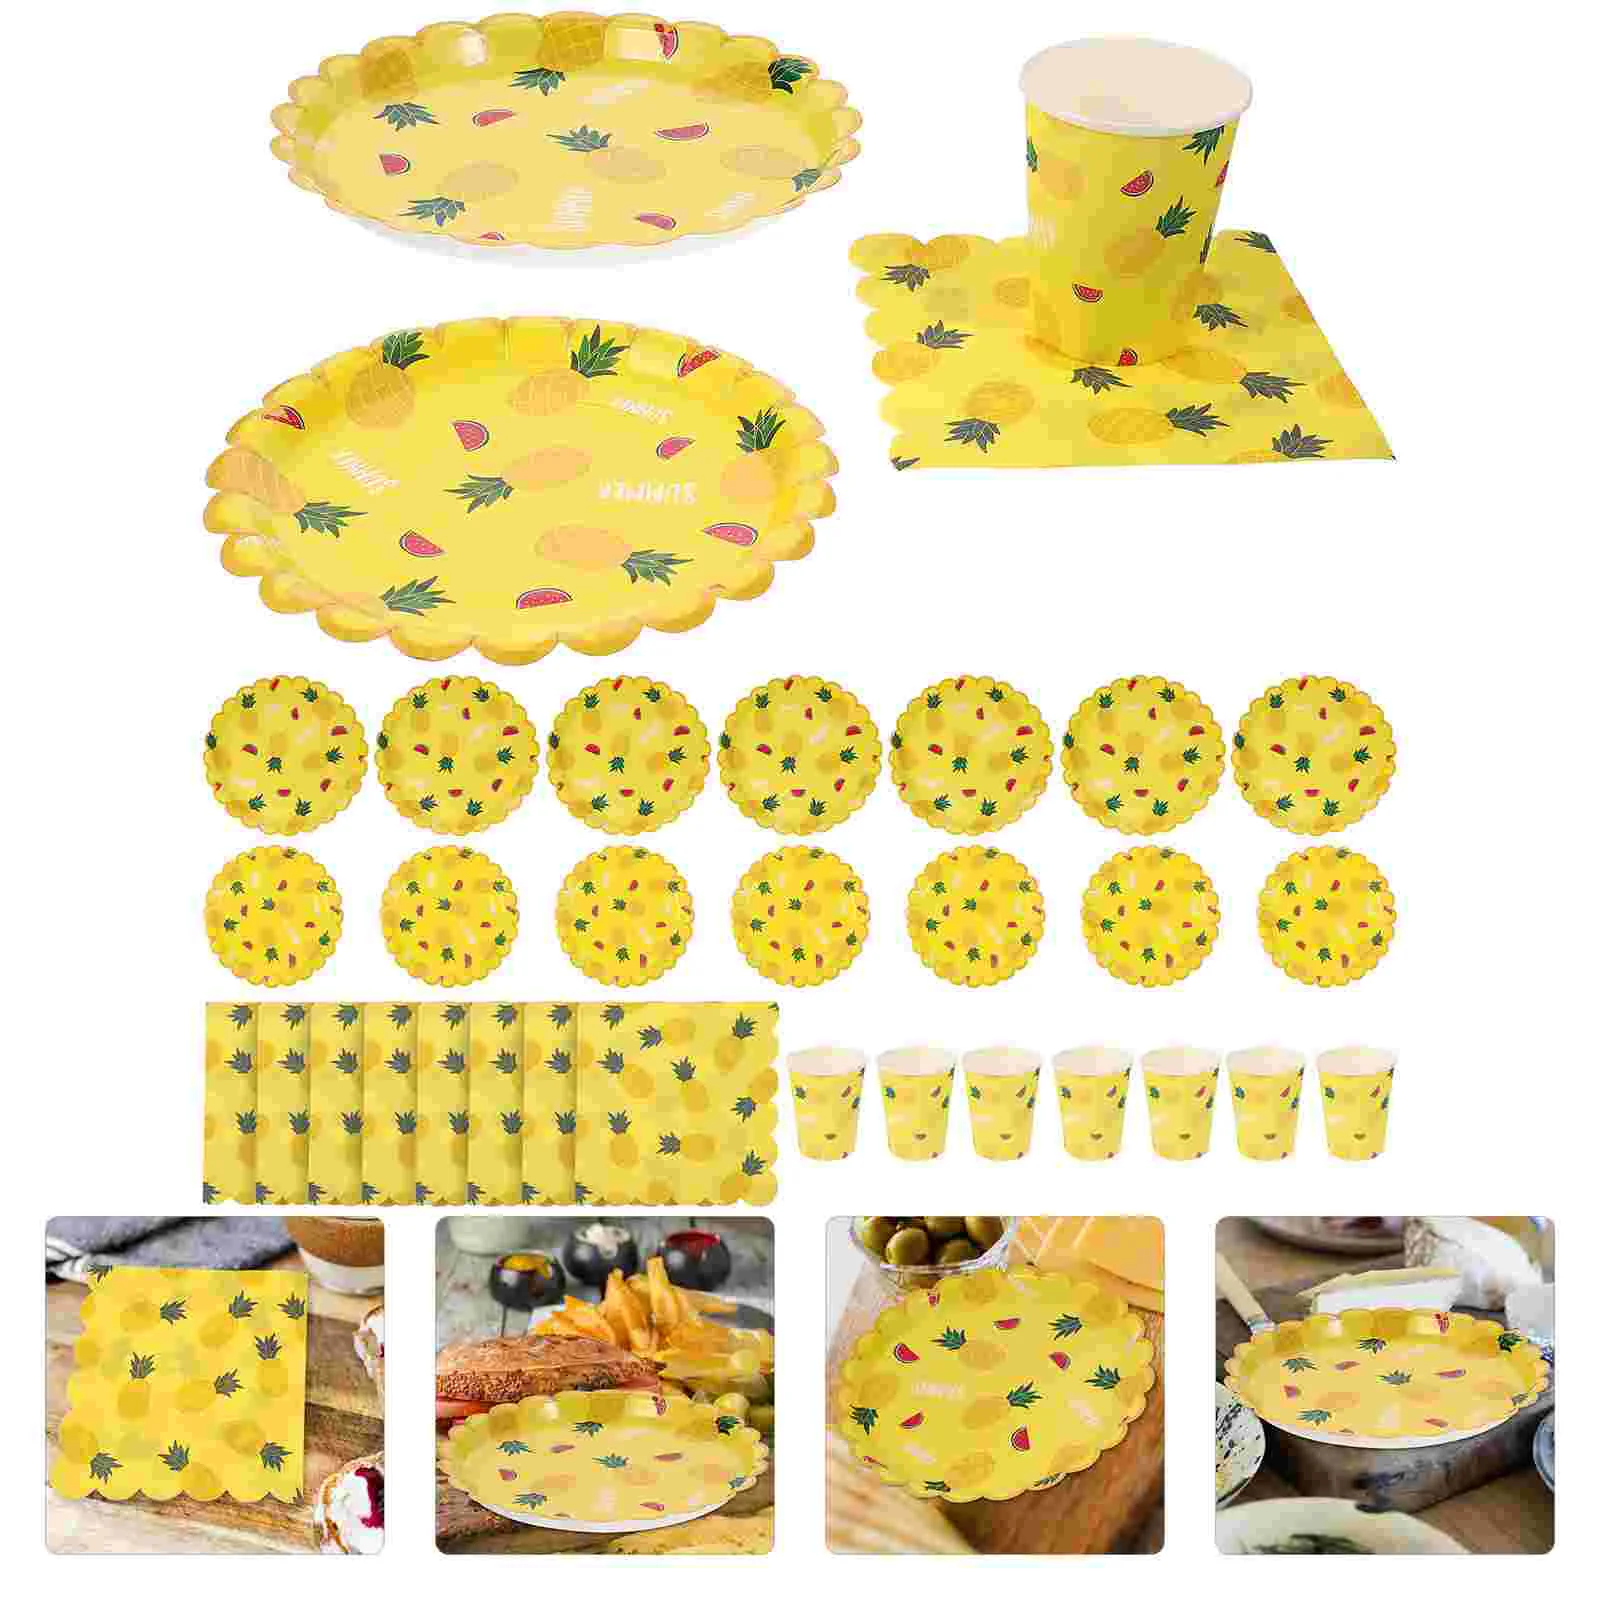 

Pineapple Paper Party Napkins Tableware Set Fruit Plates Plate Disposable Cup Cocktail Wedding Cutlery Dinnerware Luau Tropical